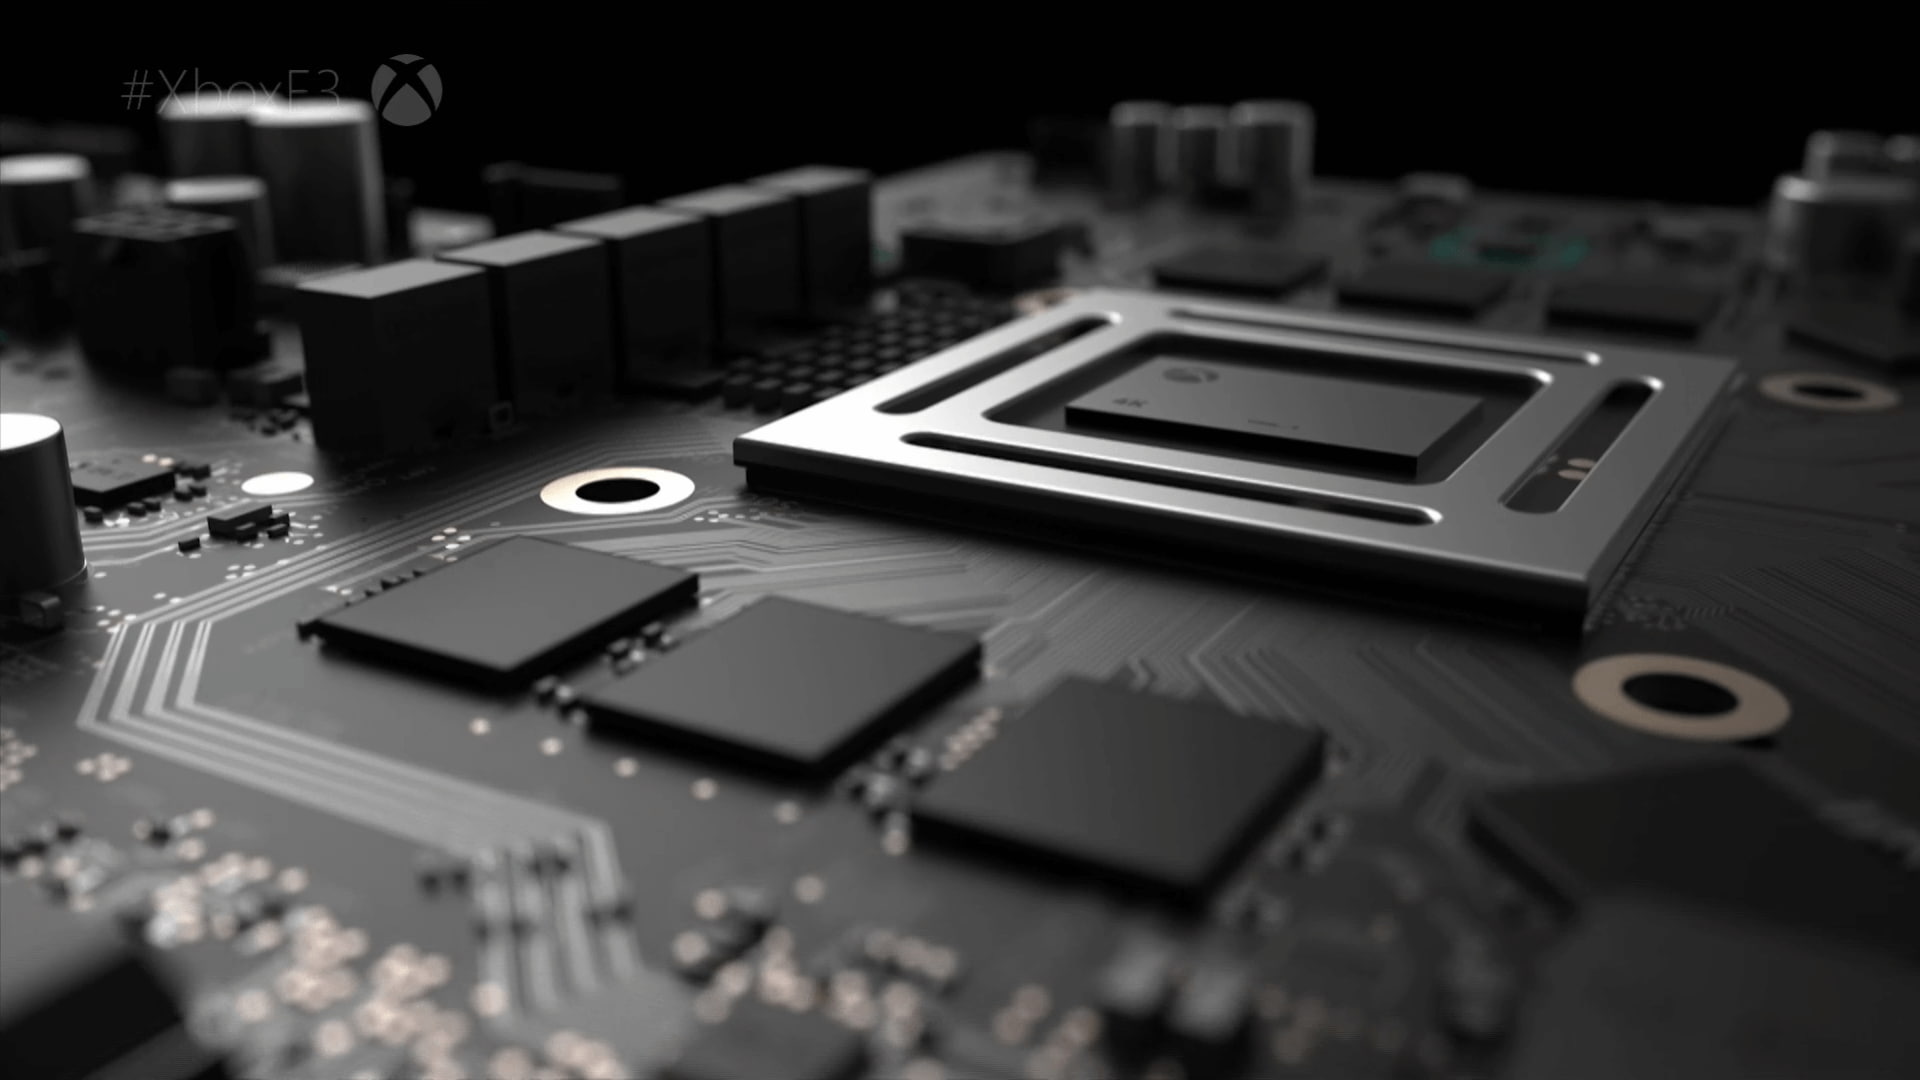 project scorpio, xbox, Technology, computer, connection, electronics industry